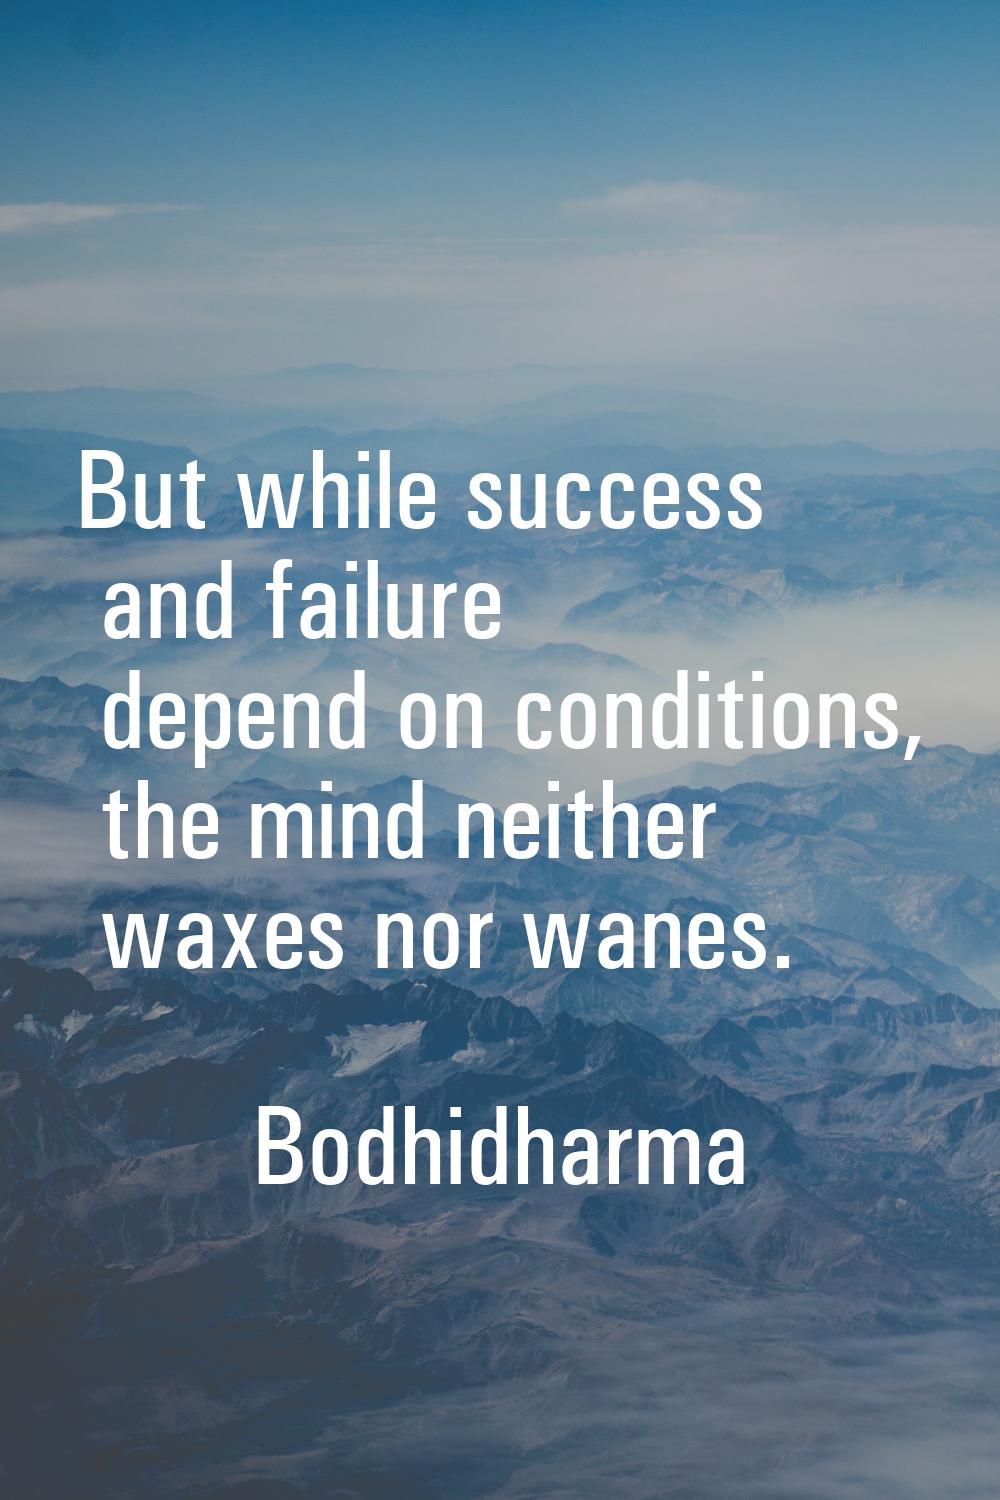 But while success and failure depend on conditions, the mind neither waxes nor wanes.